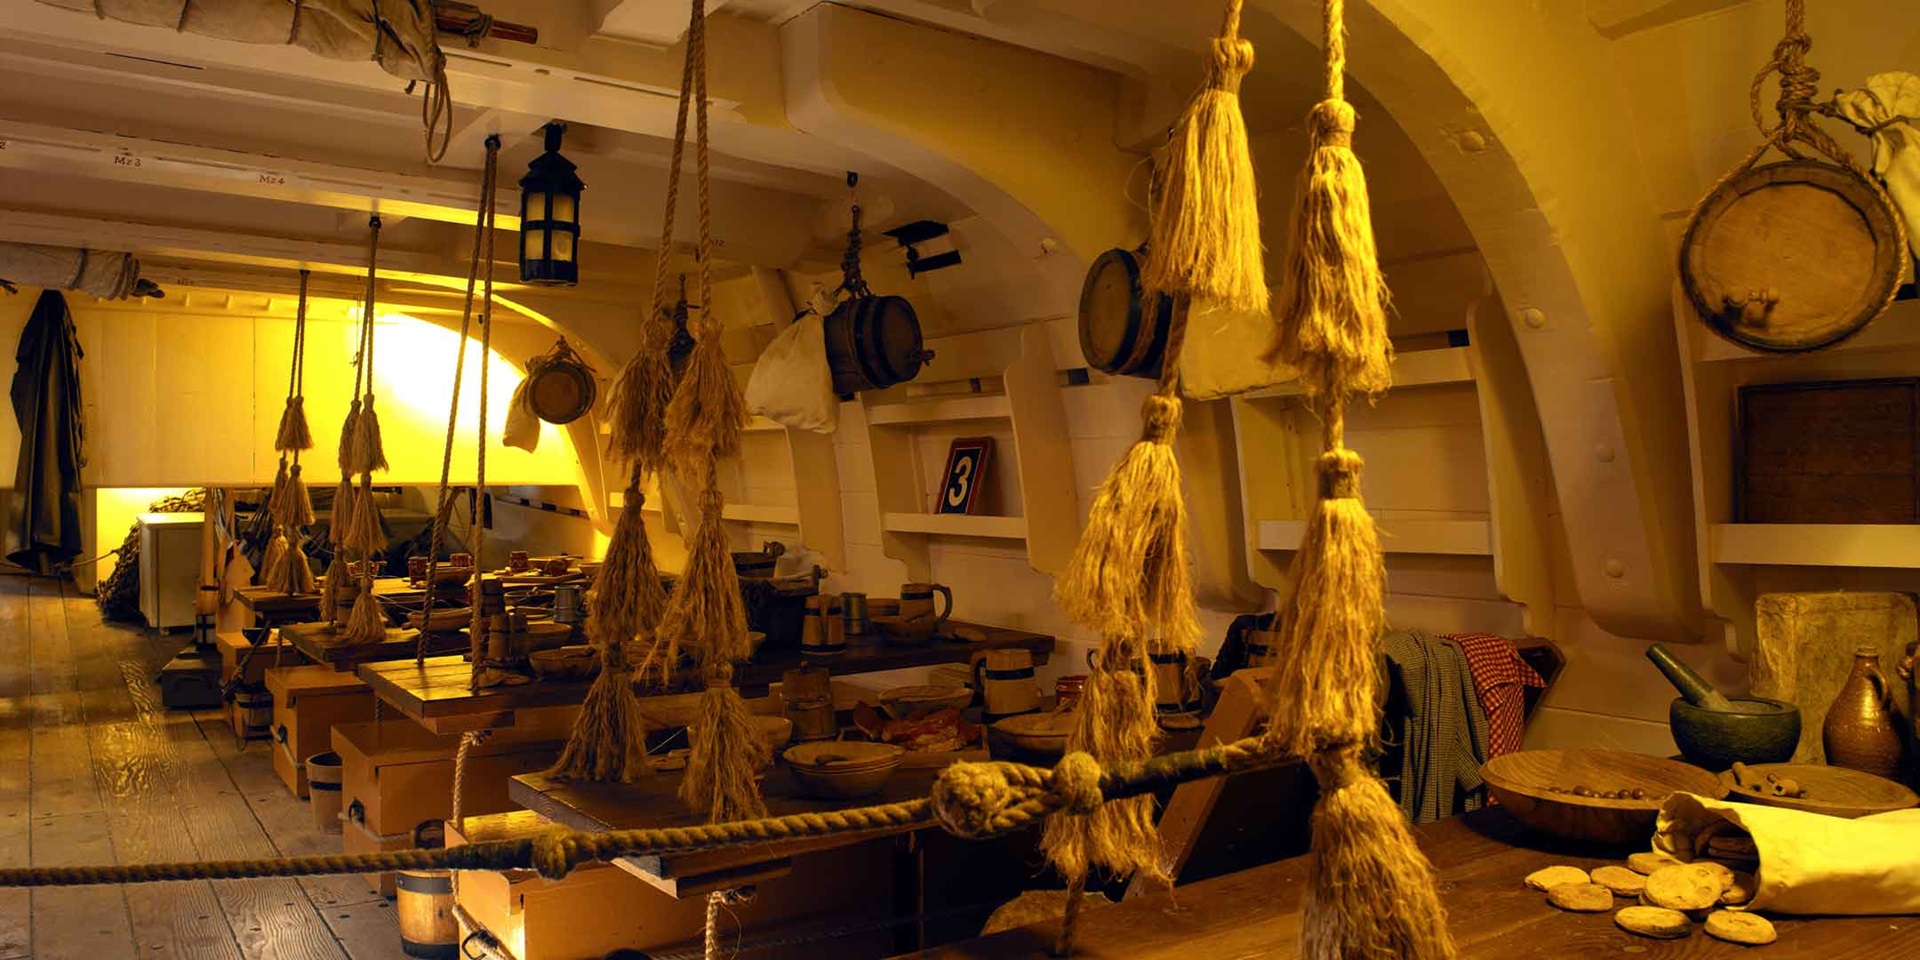 HMB Endeavour Mess Deck. The tasselled knotted ropes were used for wiping hands.